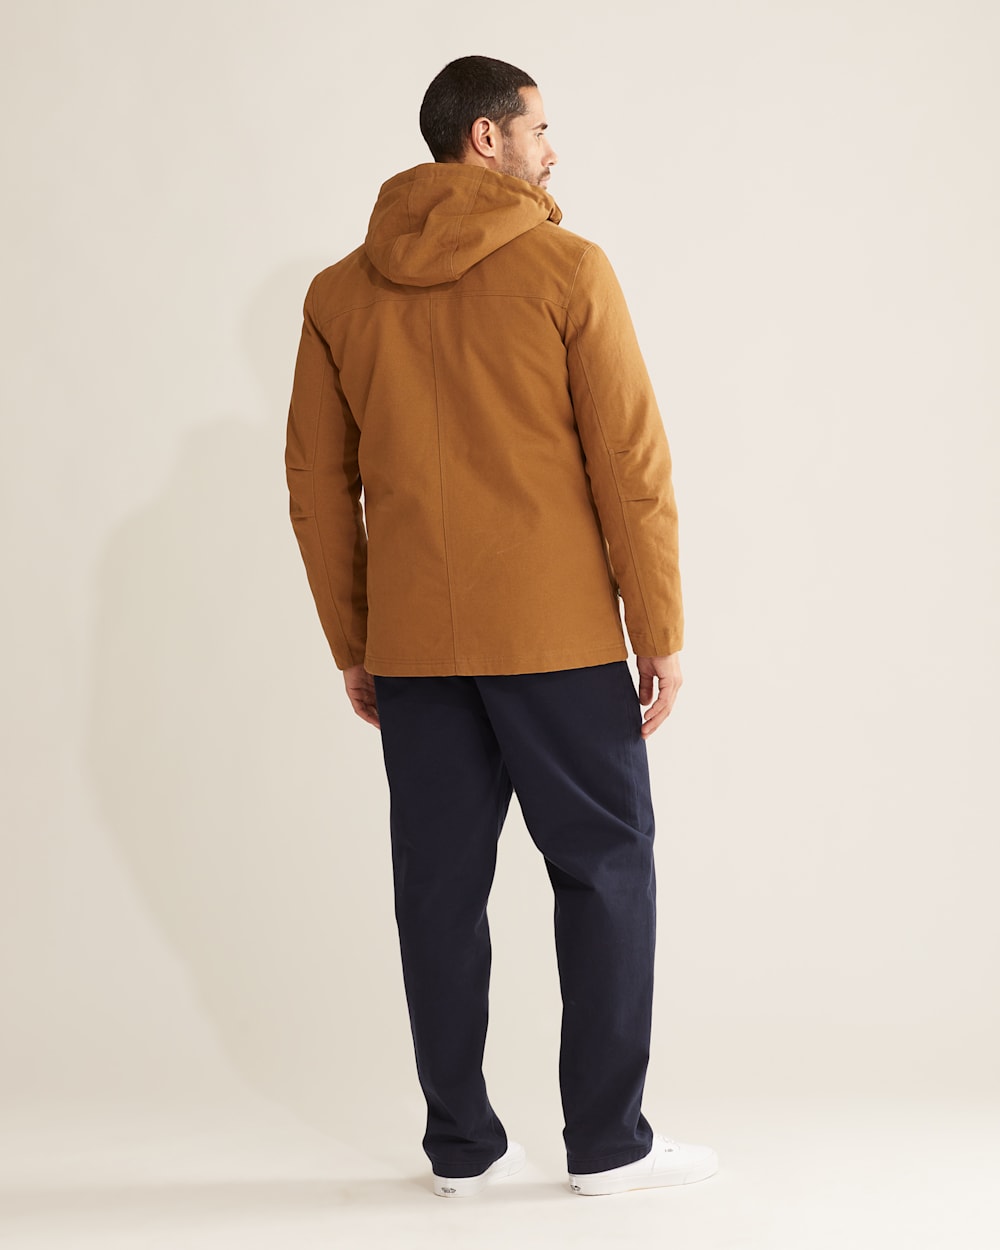 ALTERNATE VIEW OF MEN'S BROTHERS HOODED TIMBER CRUISER IN SADDLE TAN image number 3